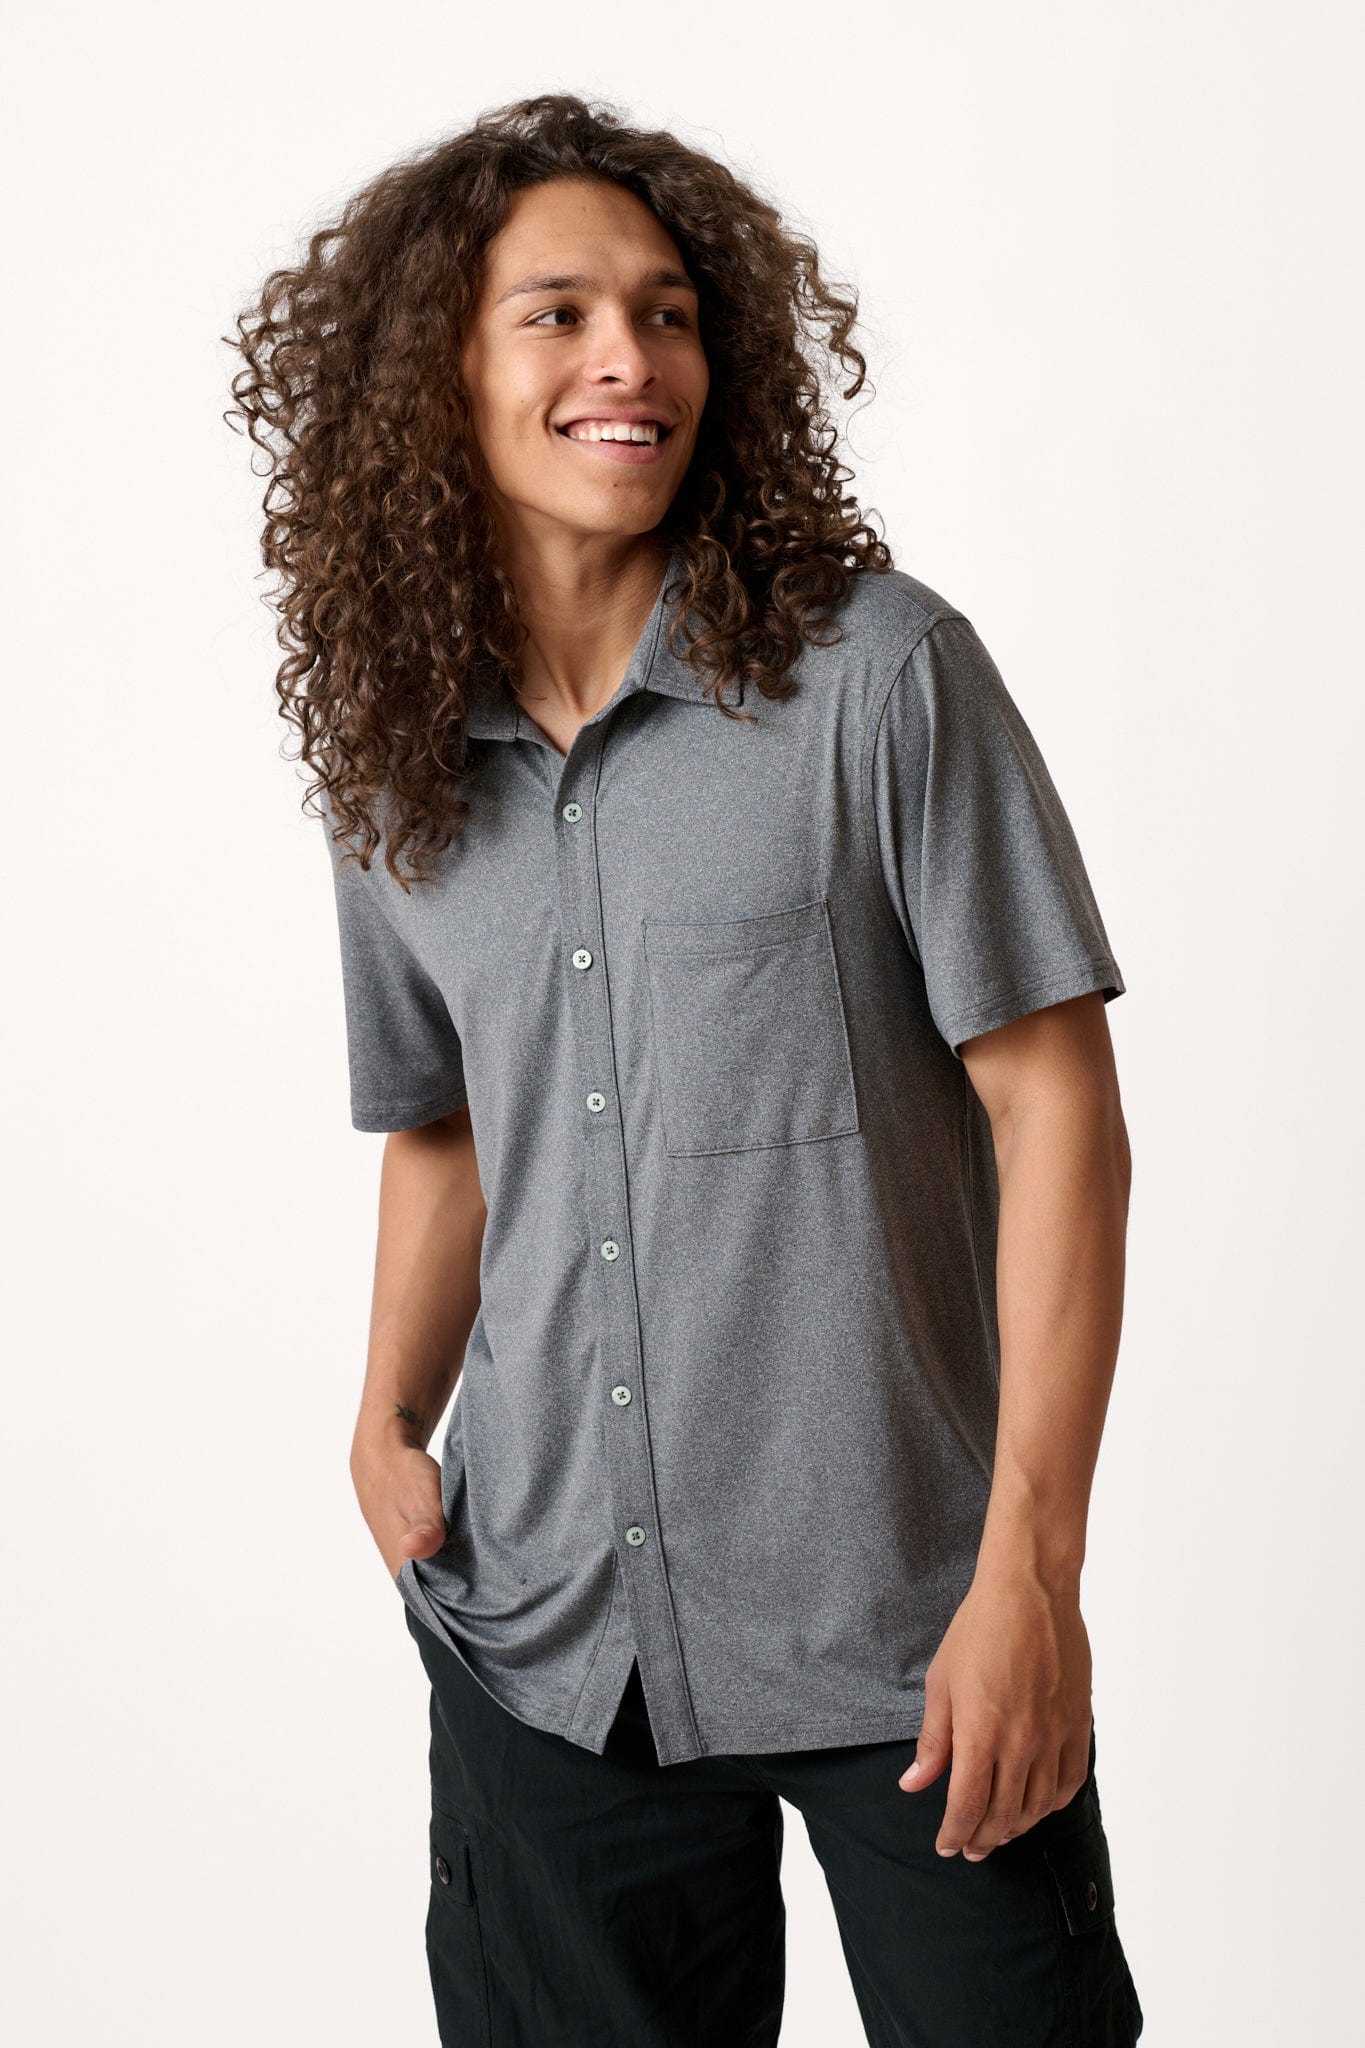 Male model dressed casual with the WEARFIRST All Day Performance Shirt in Tap Shoe Heather